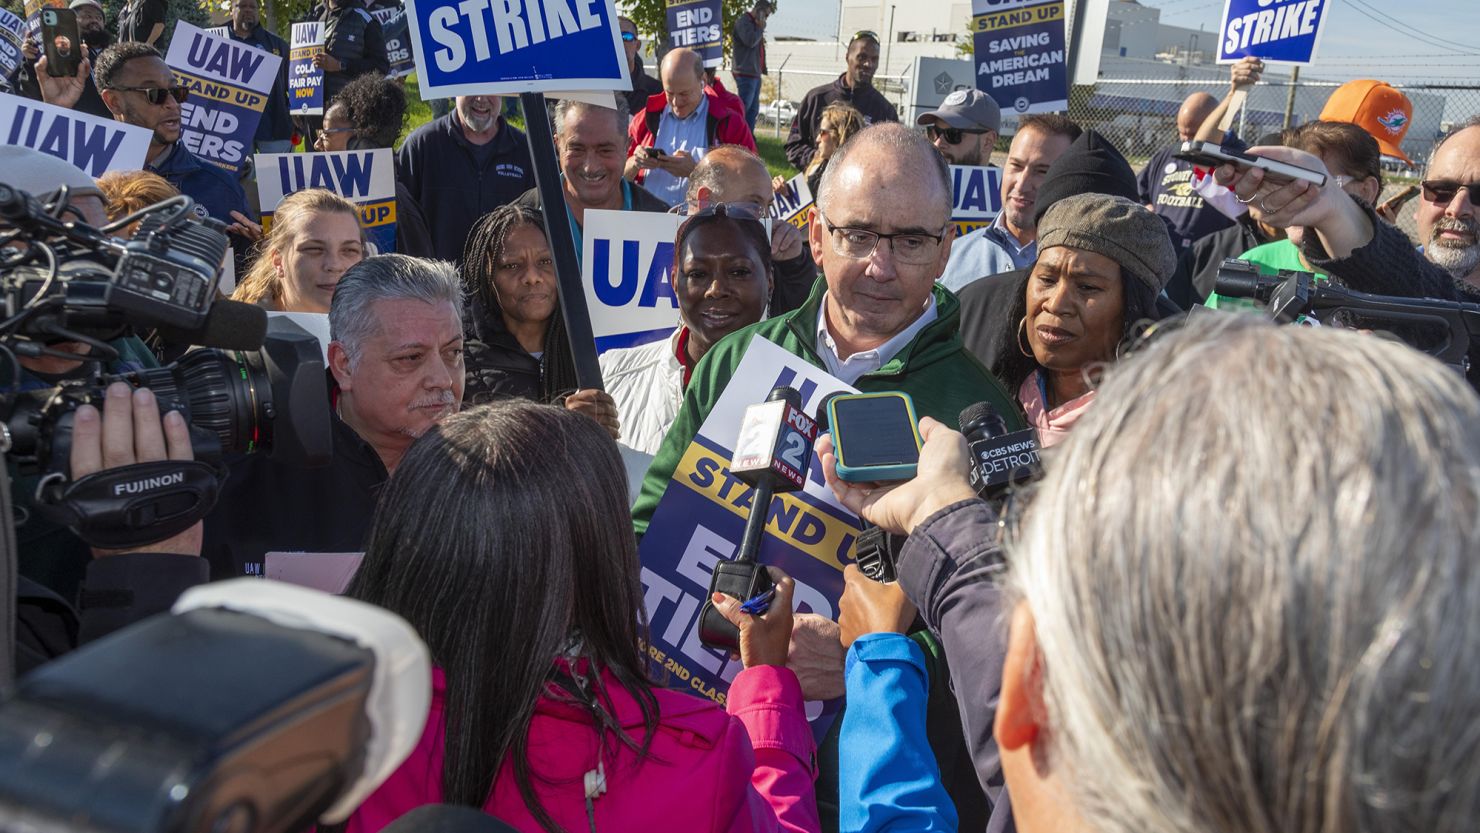 United Auto Workers President Shawn Fain at the picket line at the Stellantis plant in Sterling Heights Michigan on Monday. The union is reportedly getting close to to deals to end strikes at both GM and Stellantis.